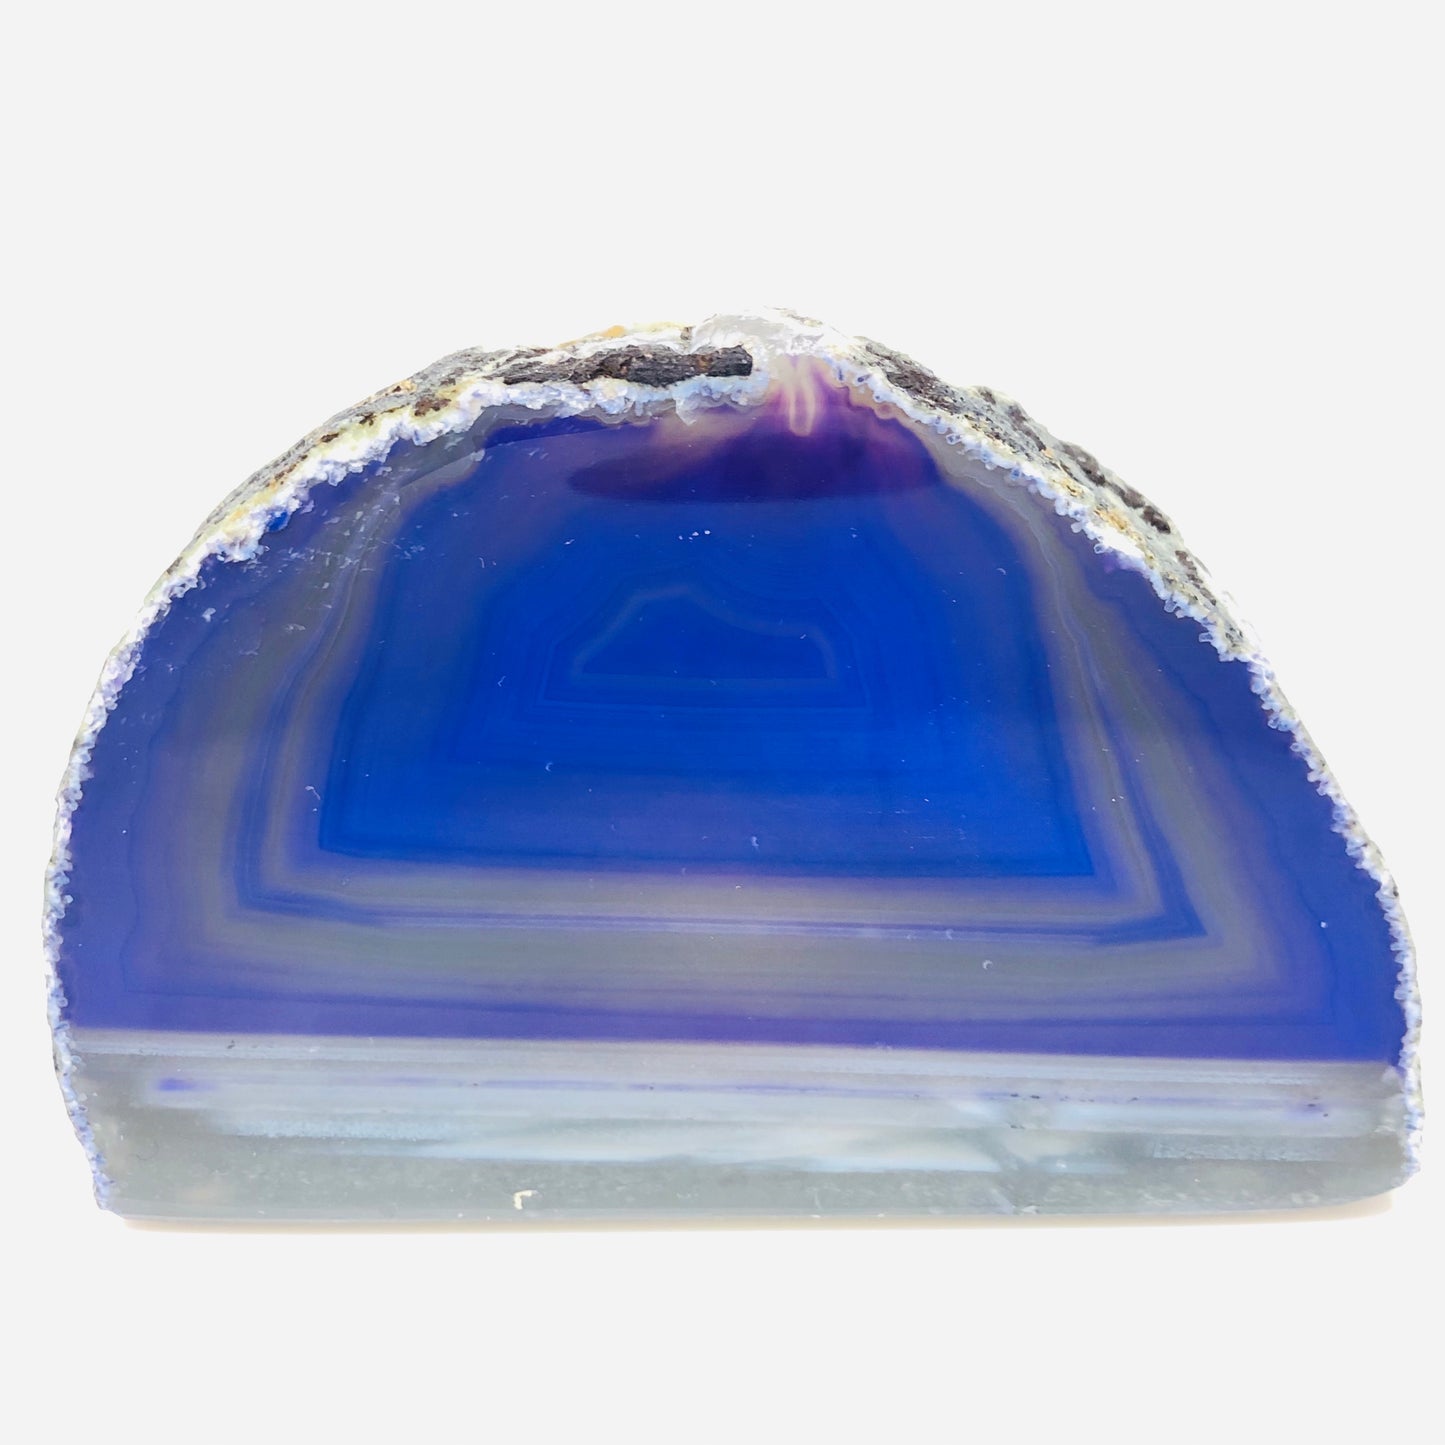 Agate Candle holder LG Aprox 2lbs